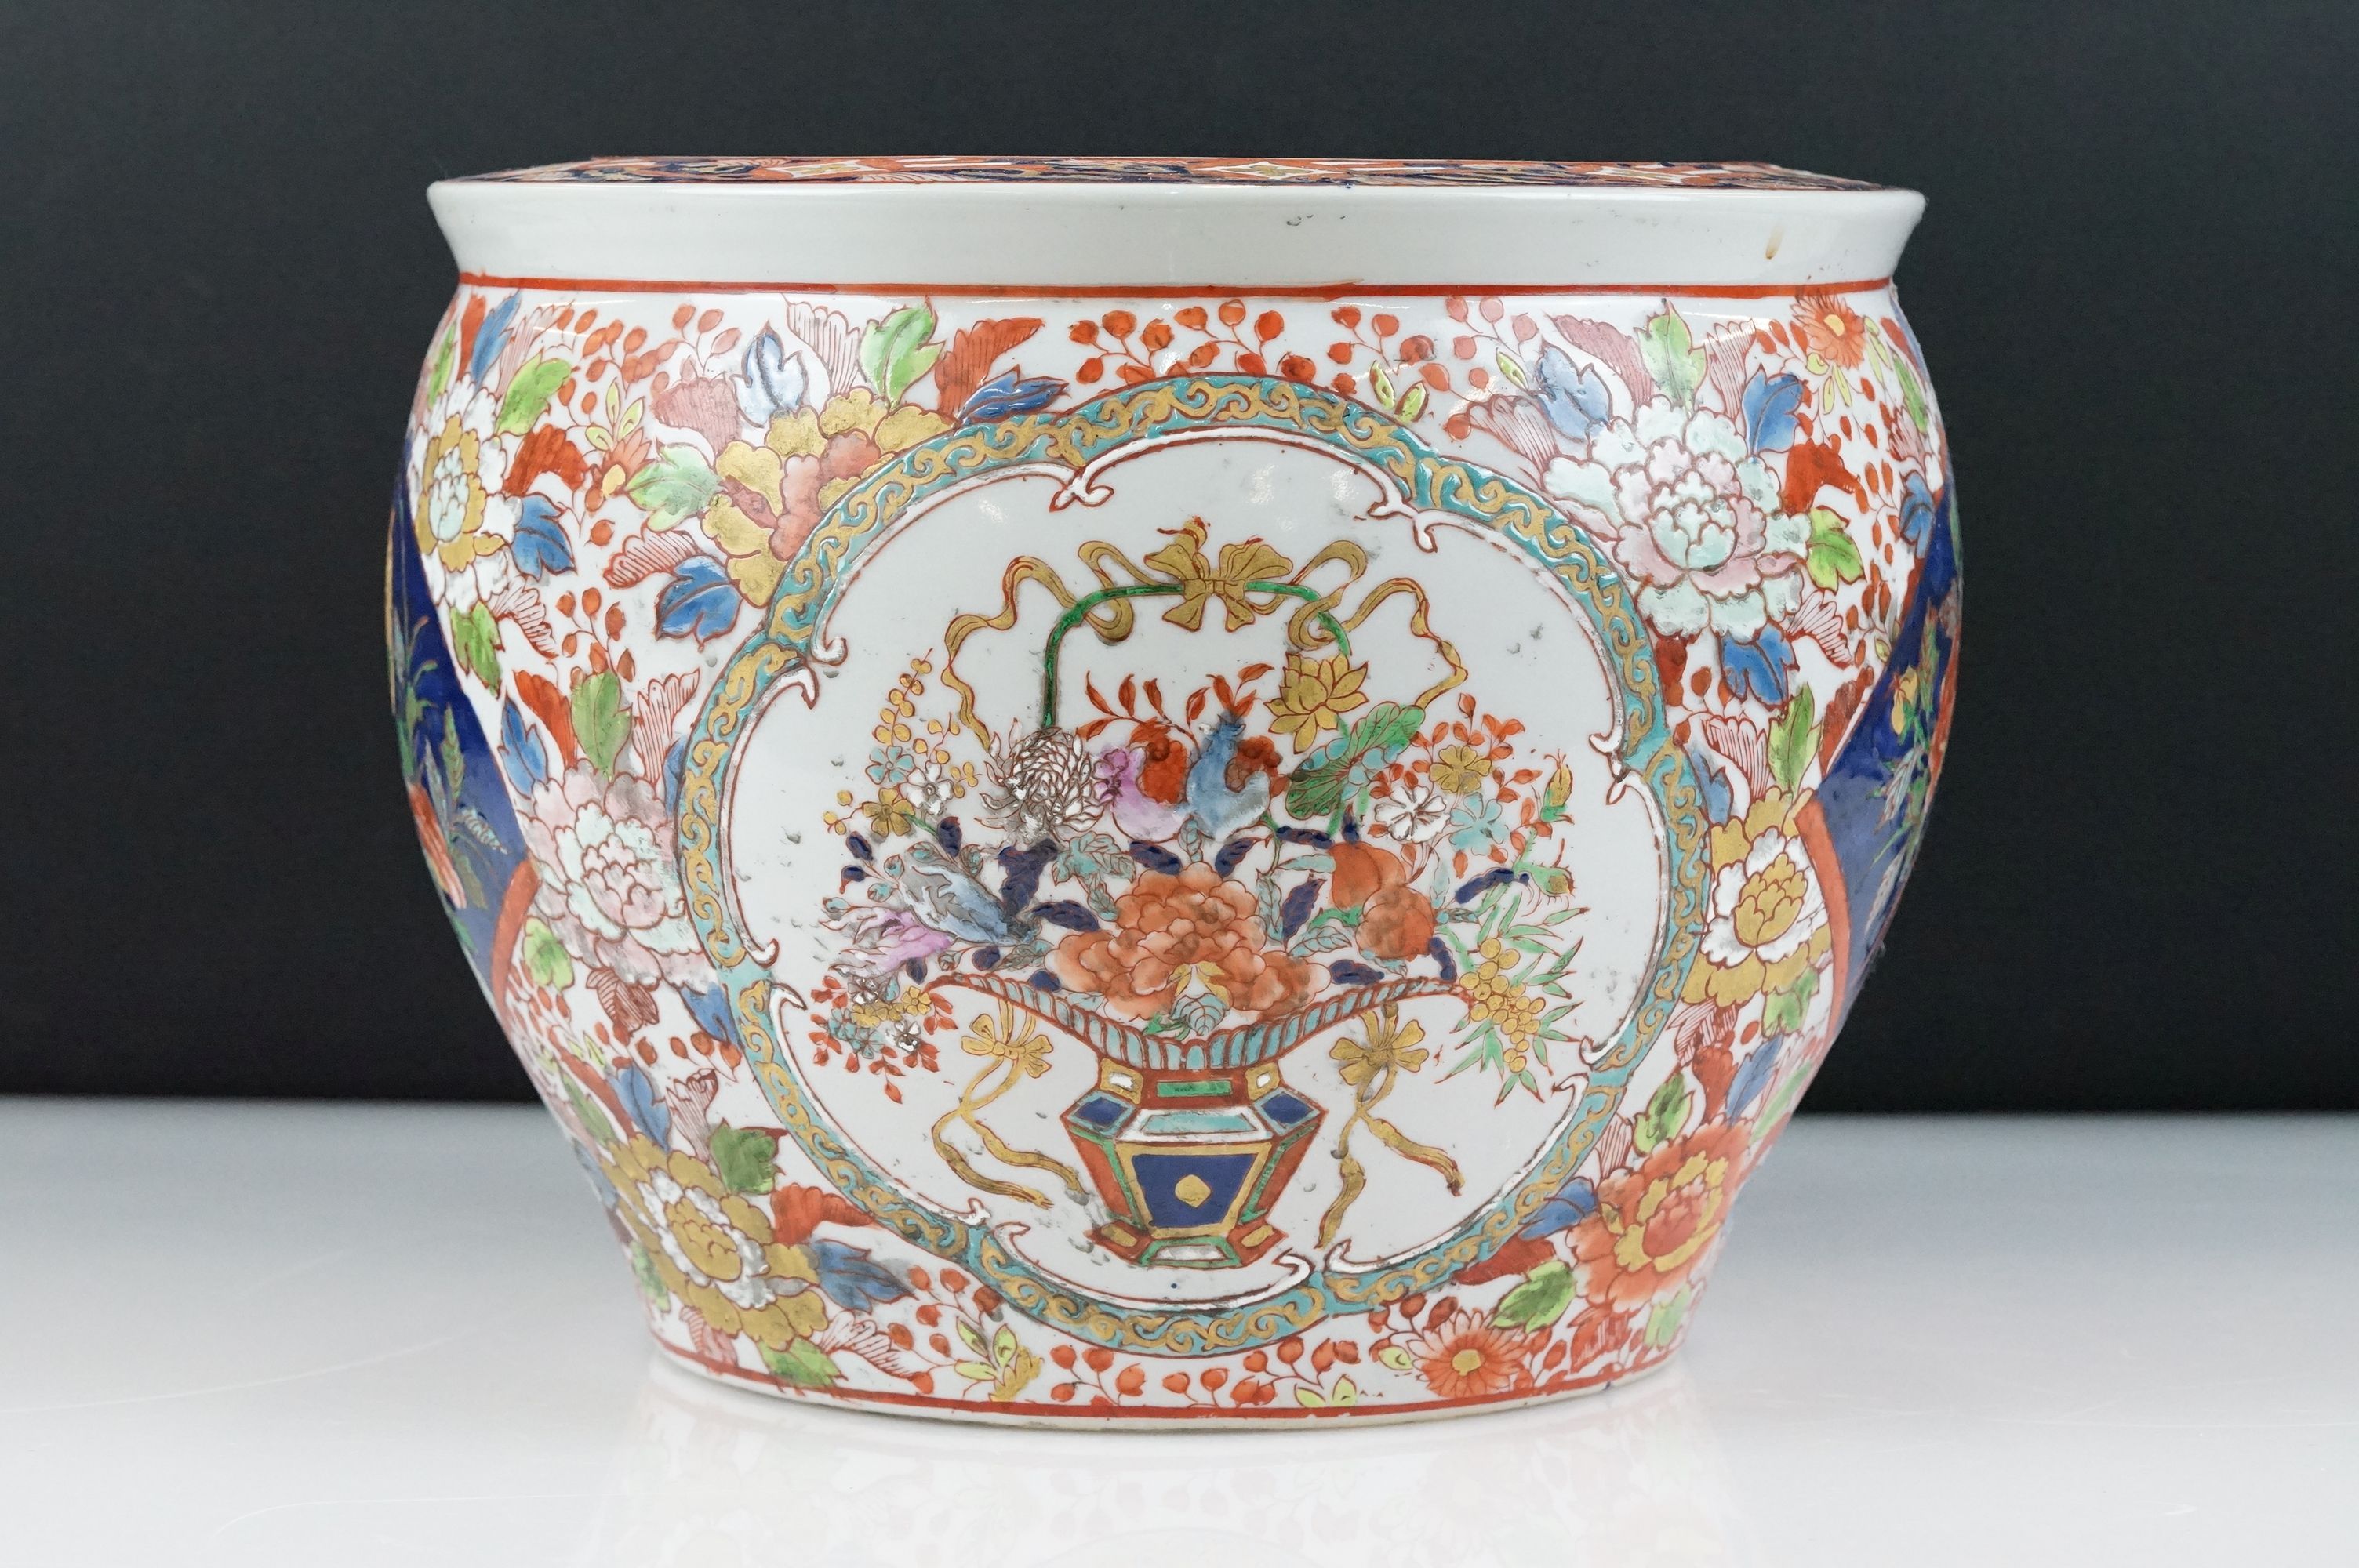 20th century Chinese Stoneware Fish Bowl decorated in a floral pattern of red, greens and blues,